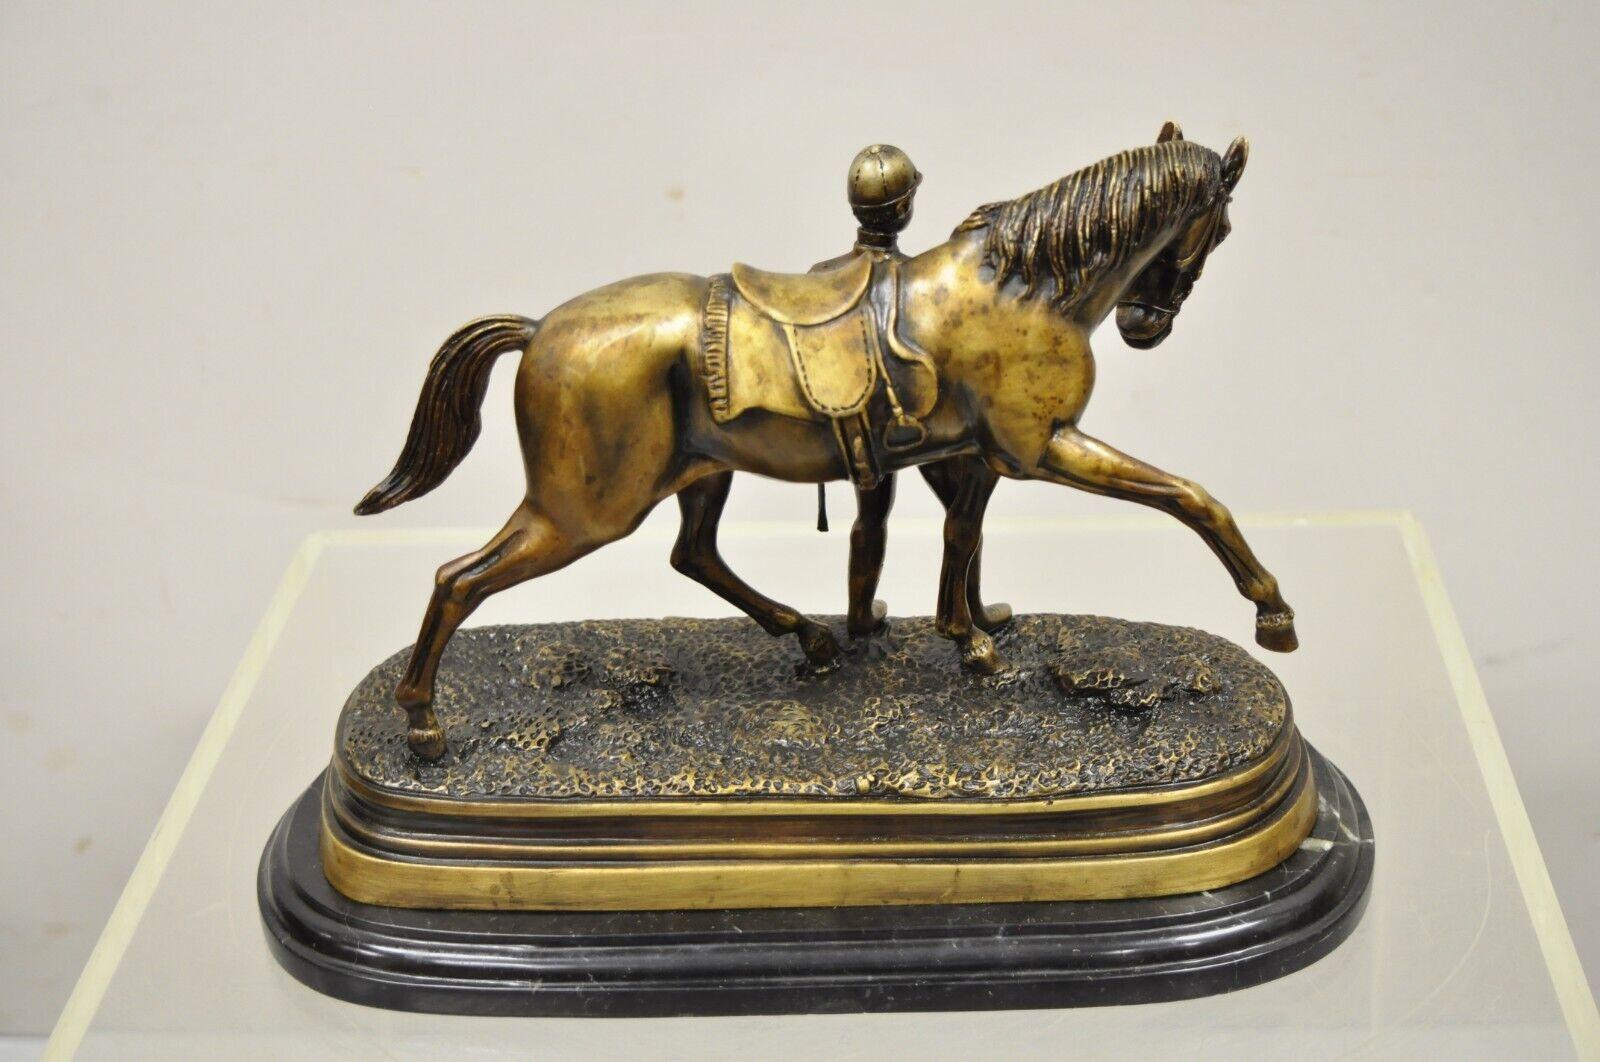 20th Century Delaware Park Bronze Equestrian Rider Jockey and Horse Marble Base Sculpture